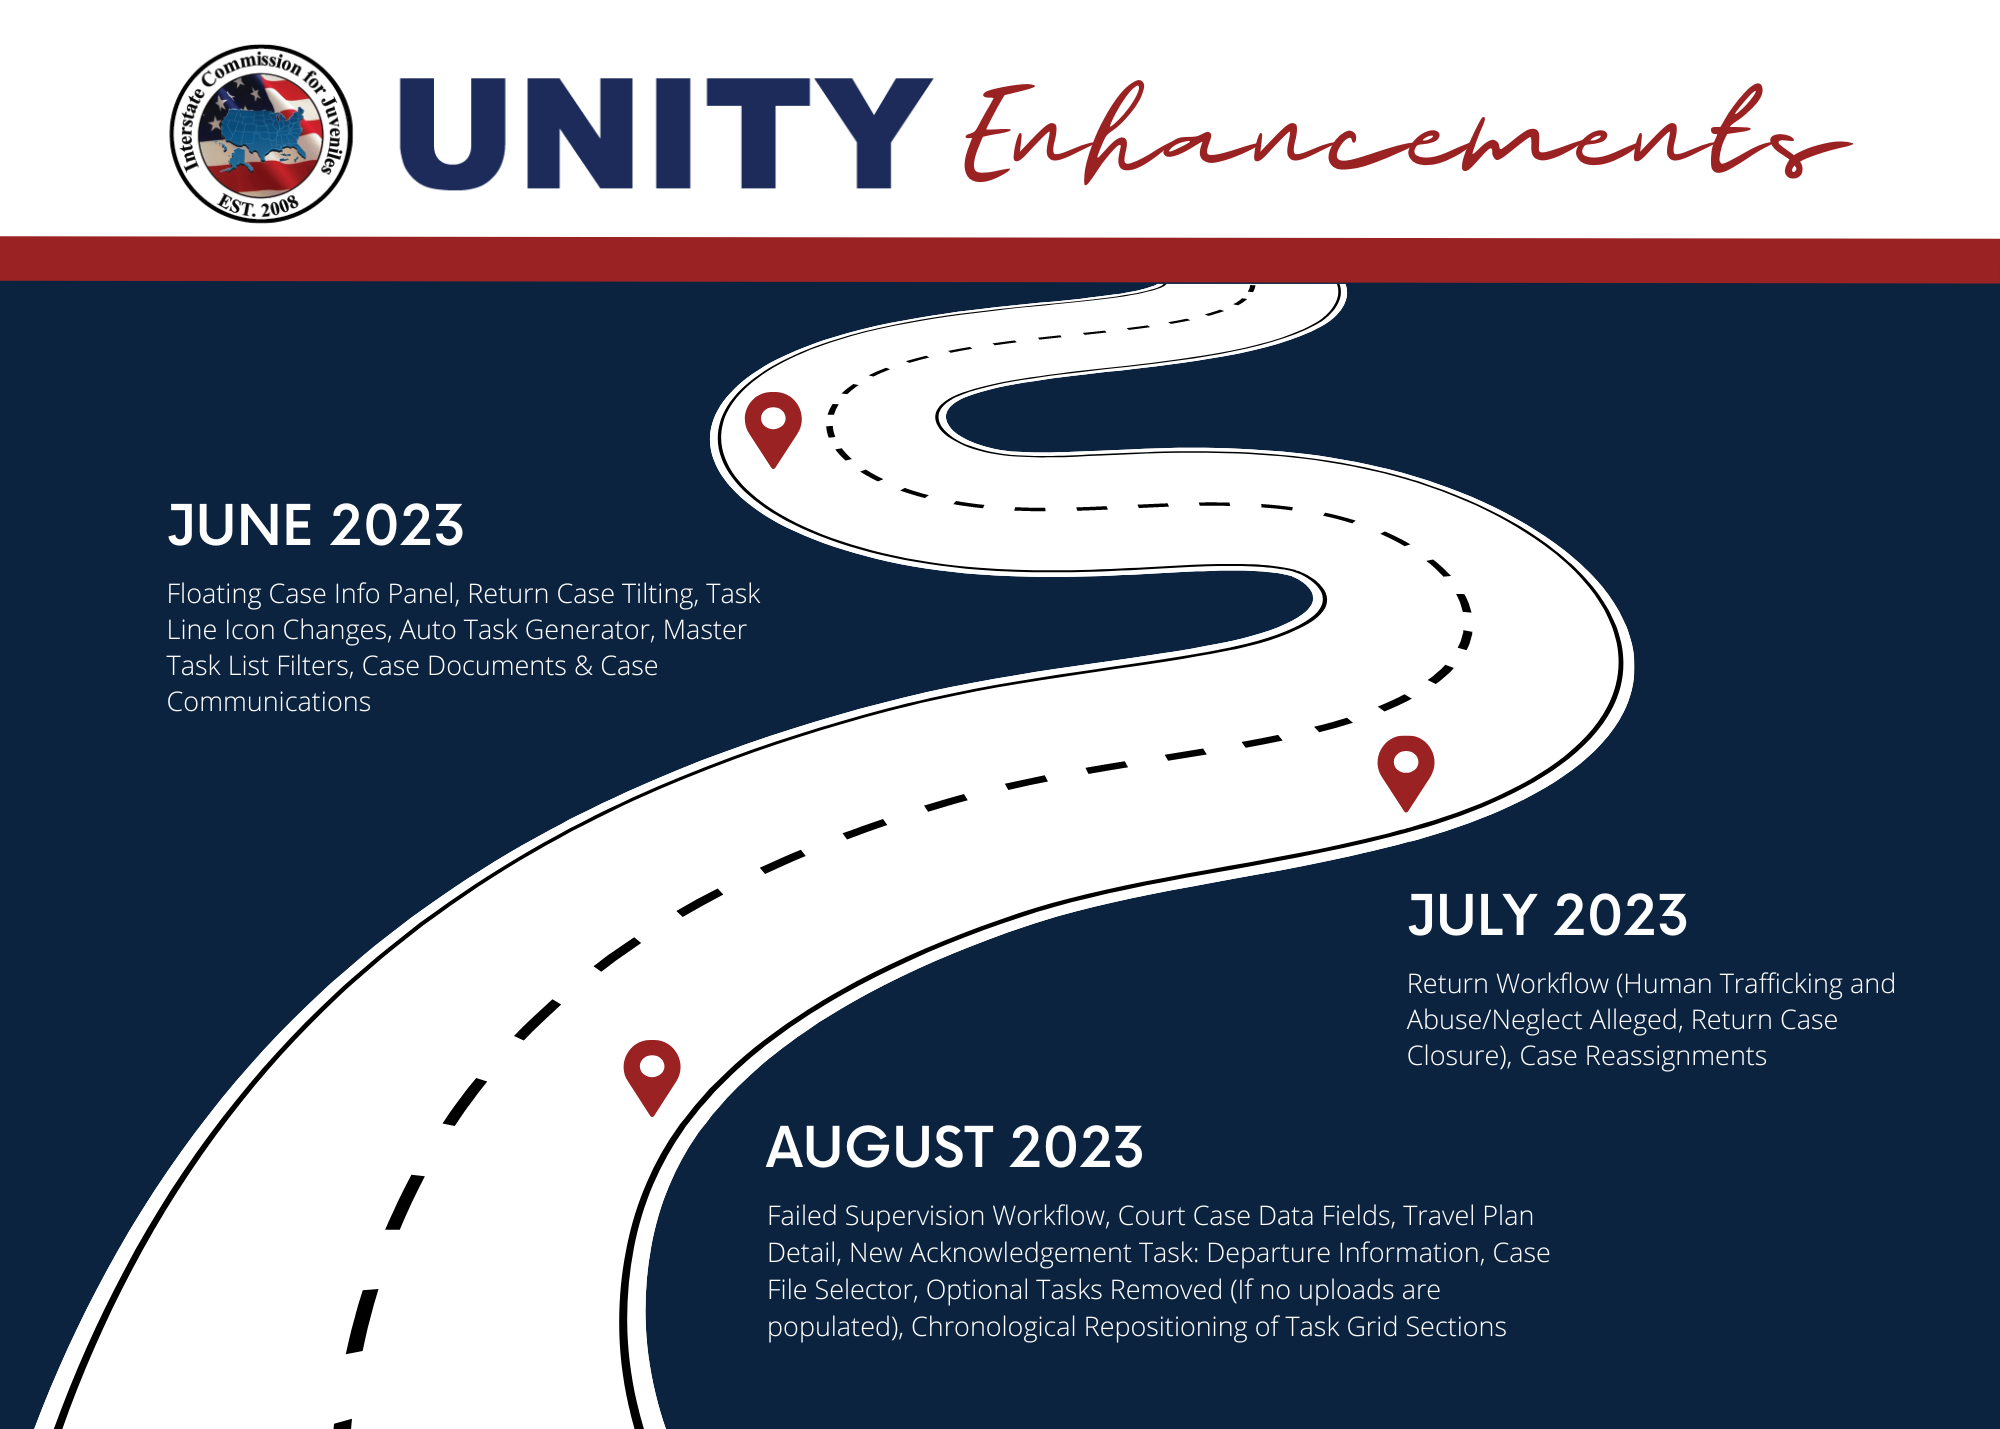 2023_UNITY_Enhancements_Timeline__7___5_in___2_.png